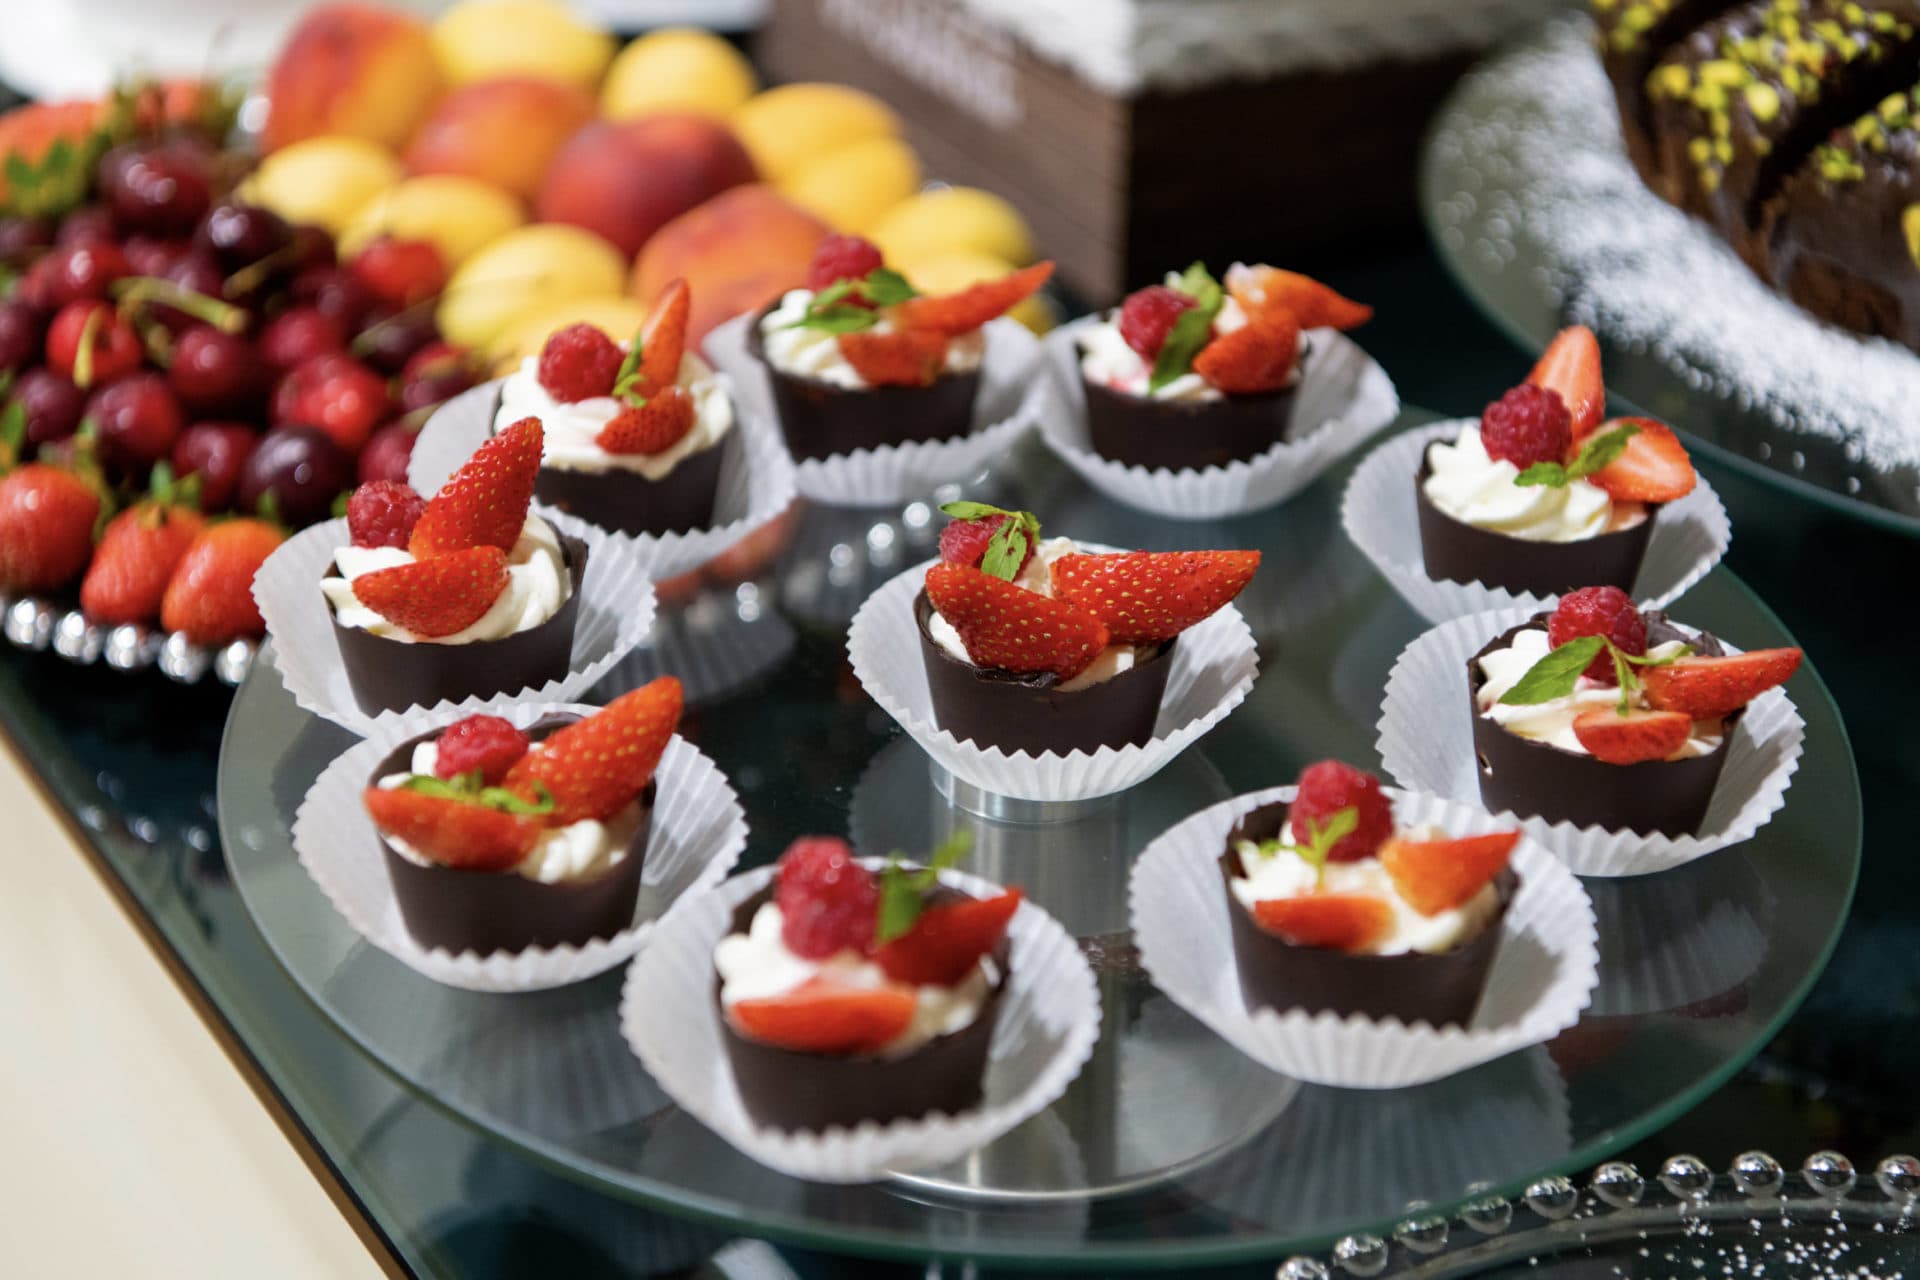 catering image 1